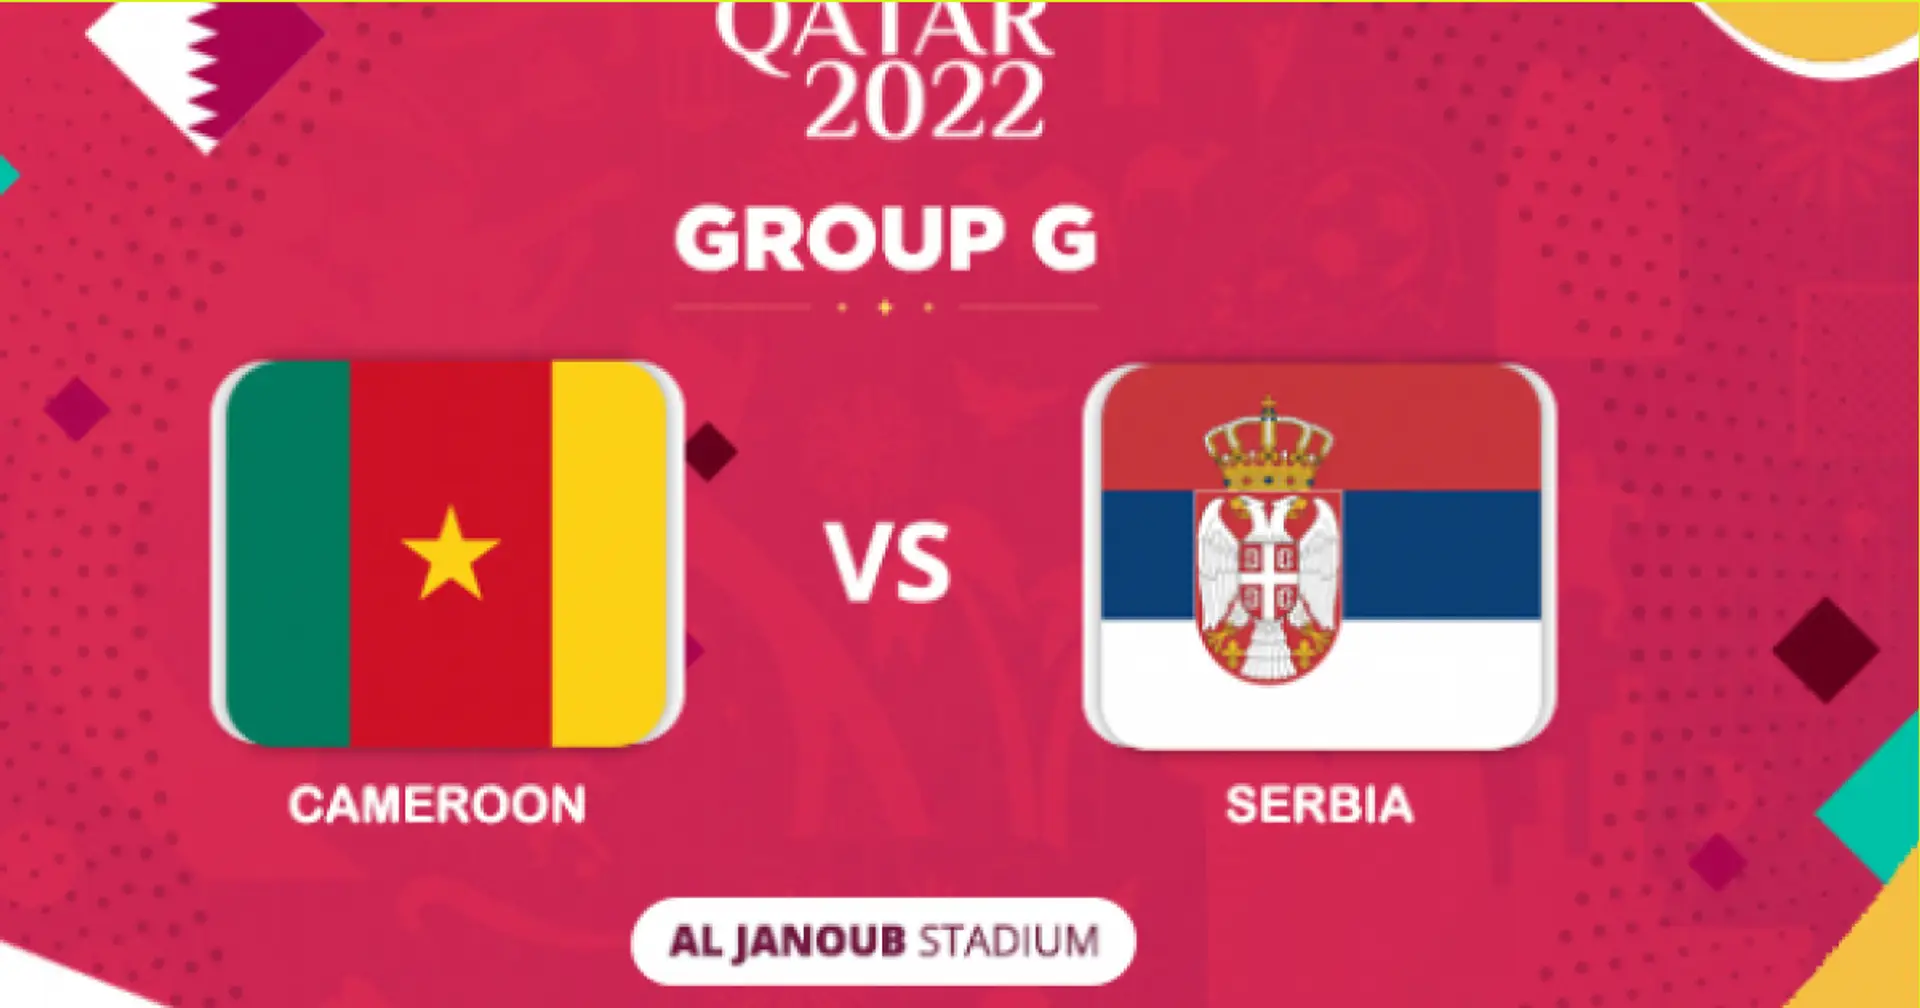 Cameroon vs Serbia: Official team lineups for the World Cup clash revealed